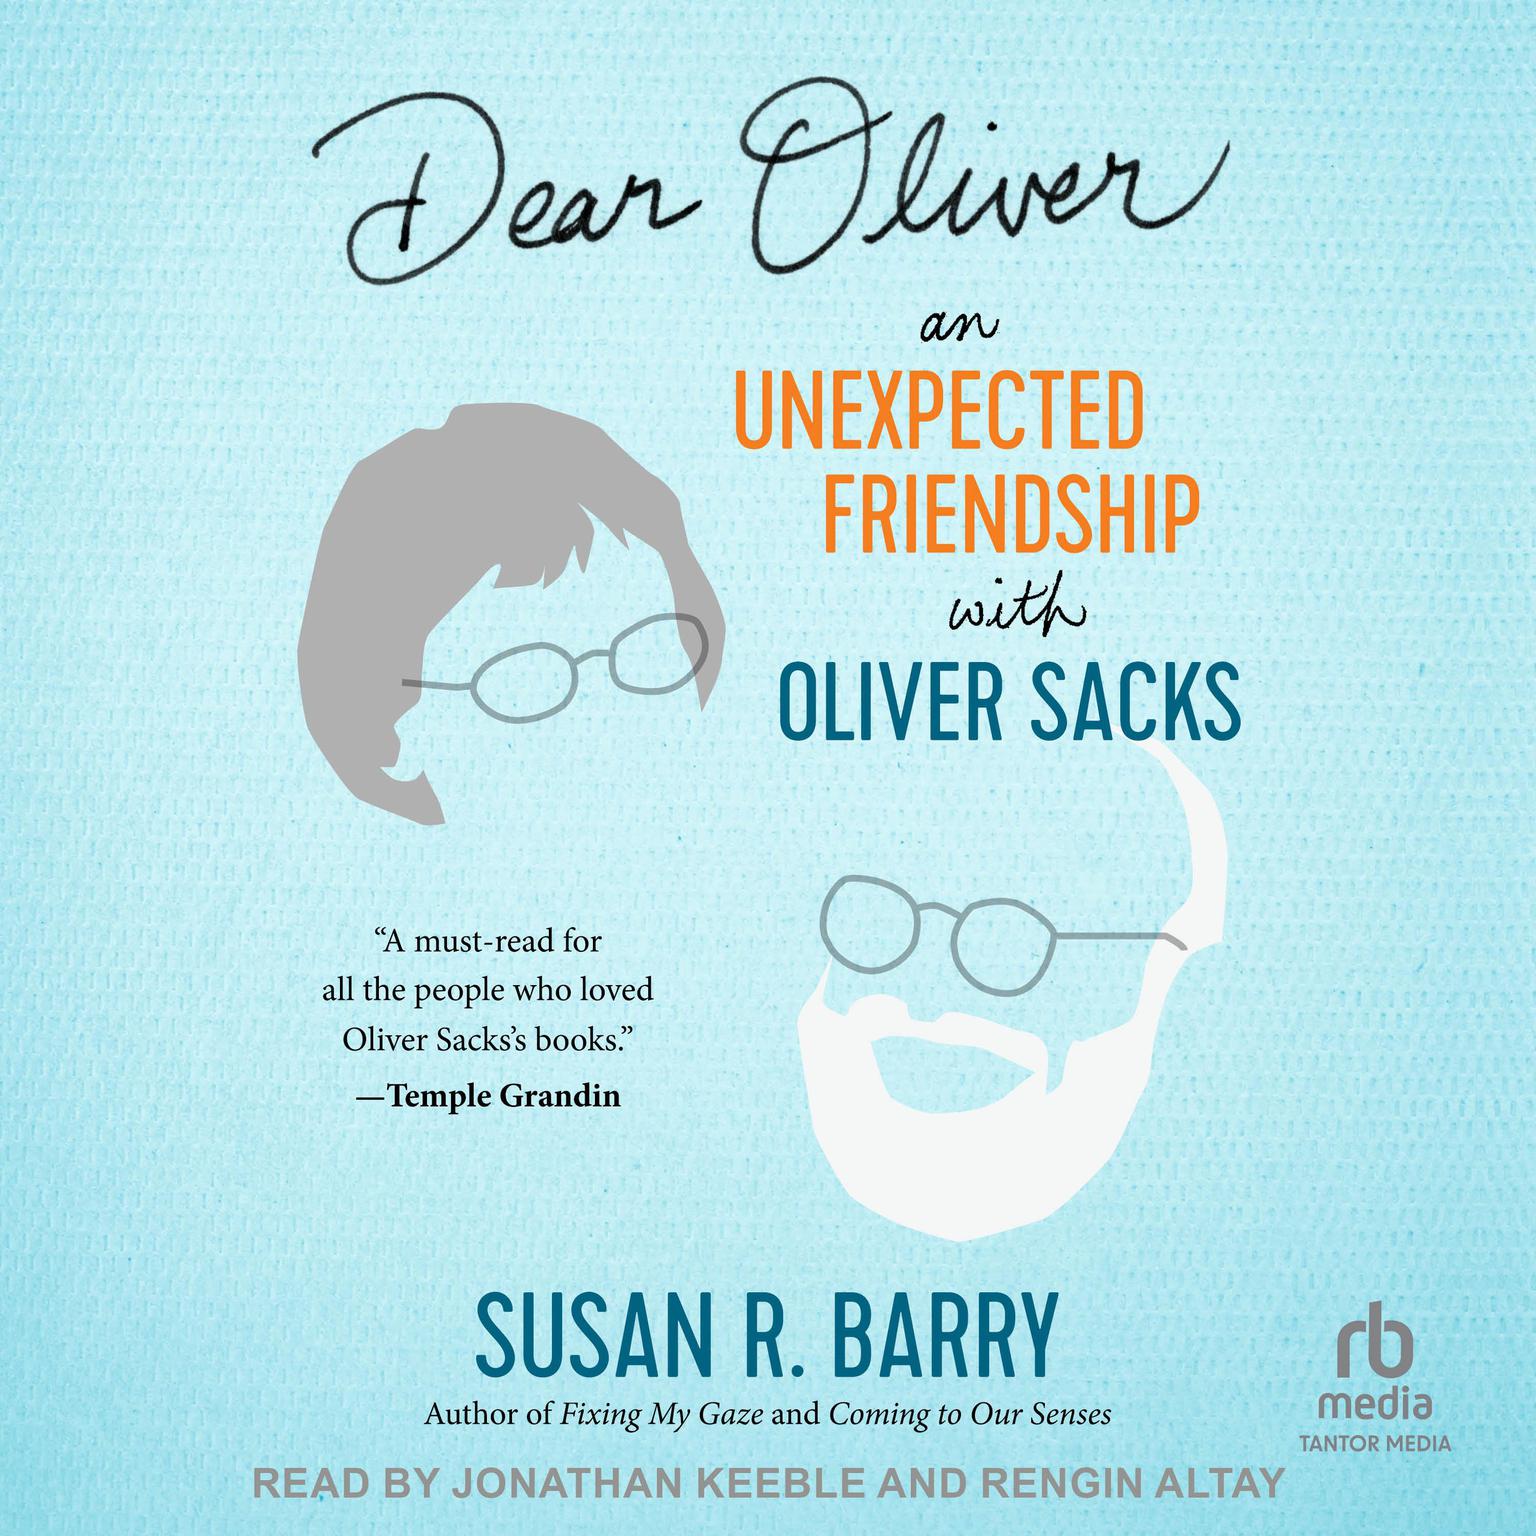 Dear Oliver: An Unexpected Friendship with Oliver Sacks Audiobook, by Susan R. Barry